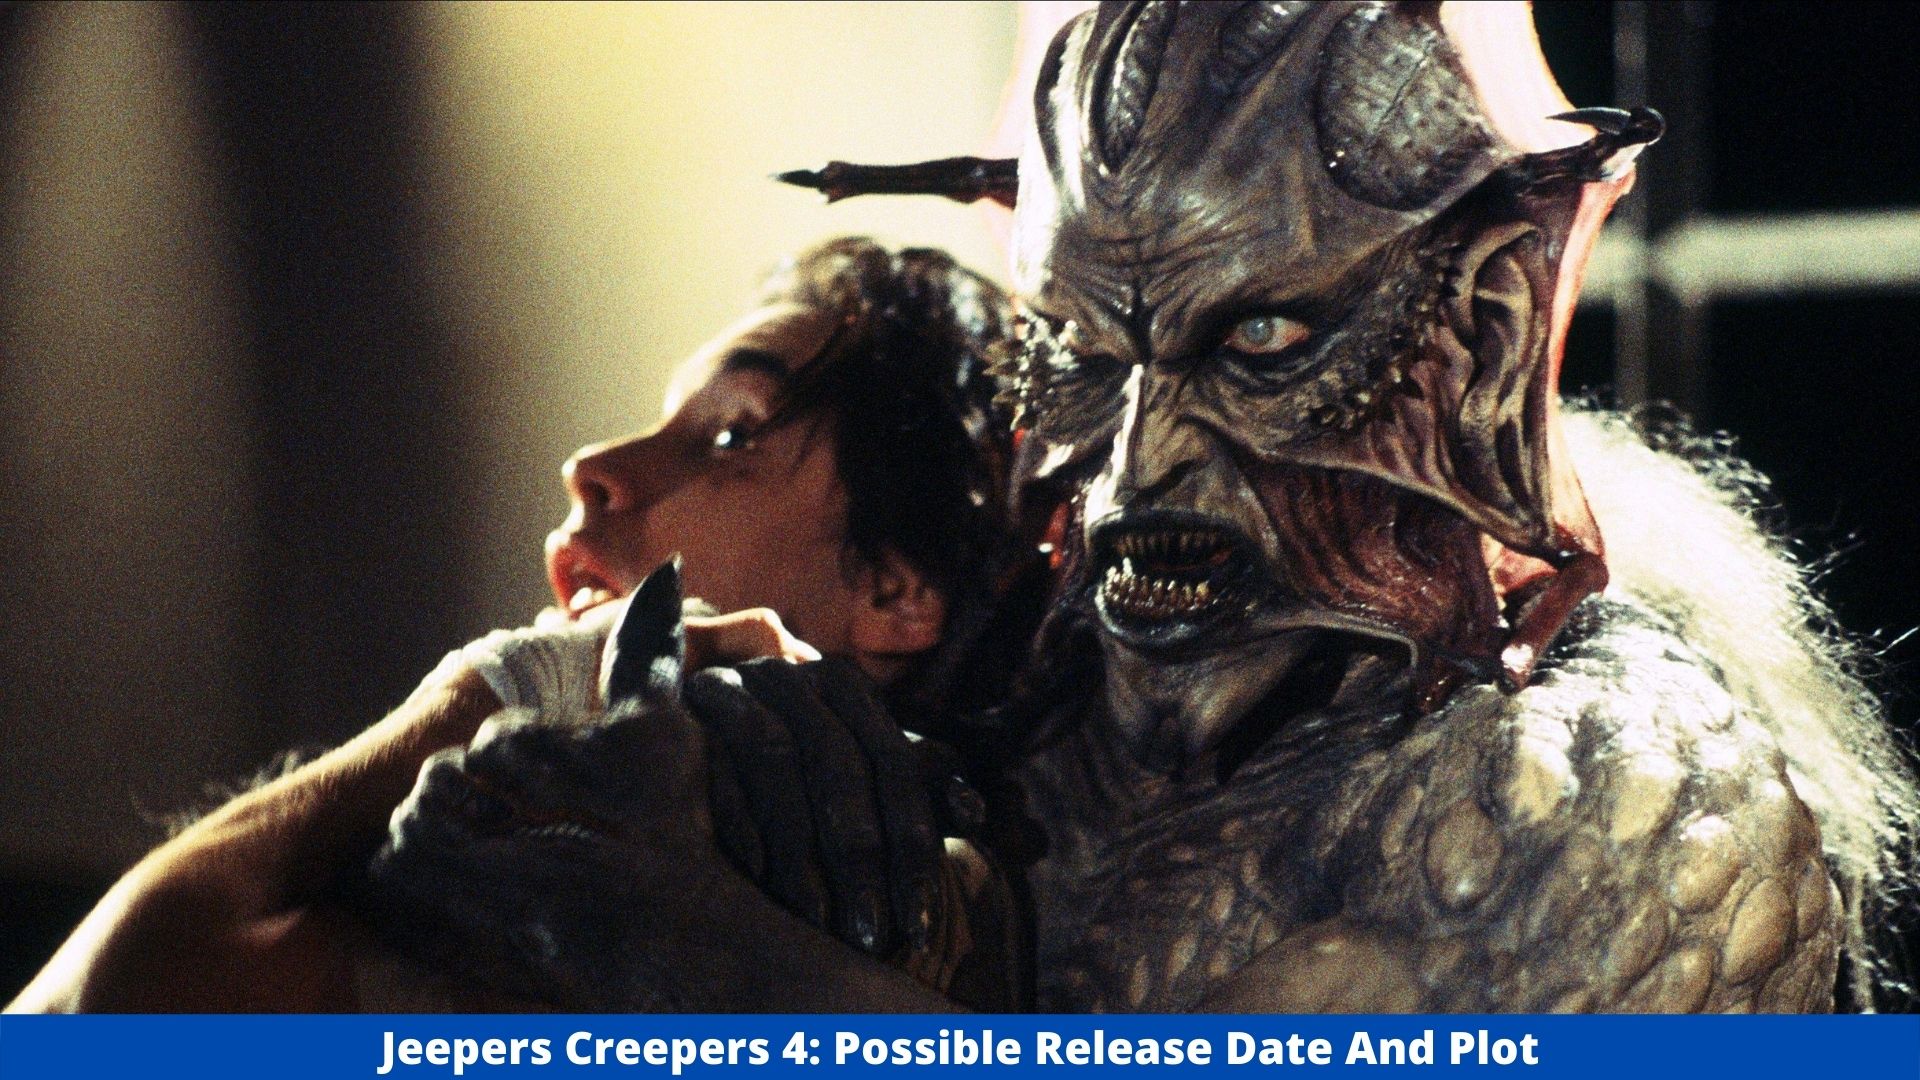 Jeepers Creepers 4: Possible Release Date And Plot